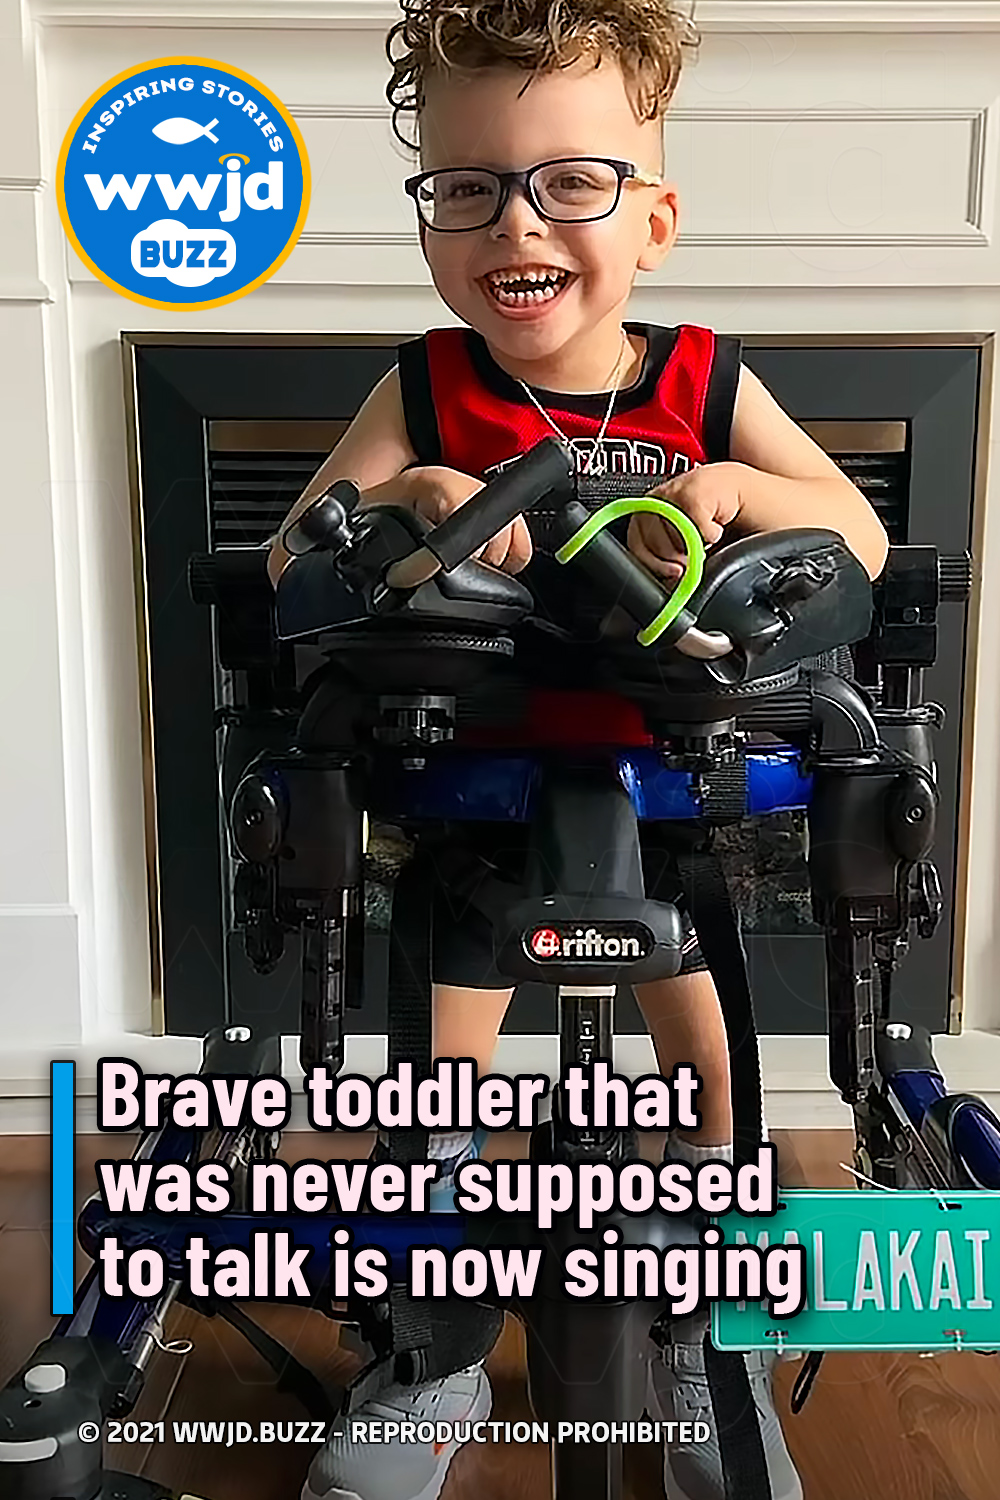 Brave toddler that was never supposed to talk is now singing